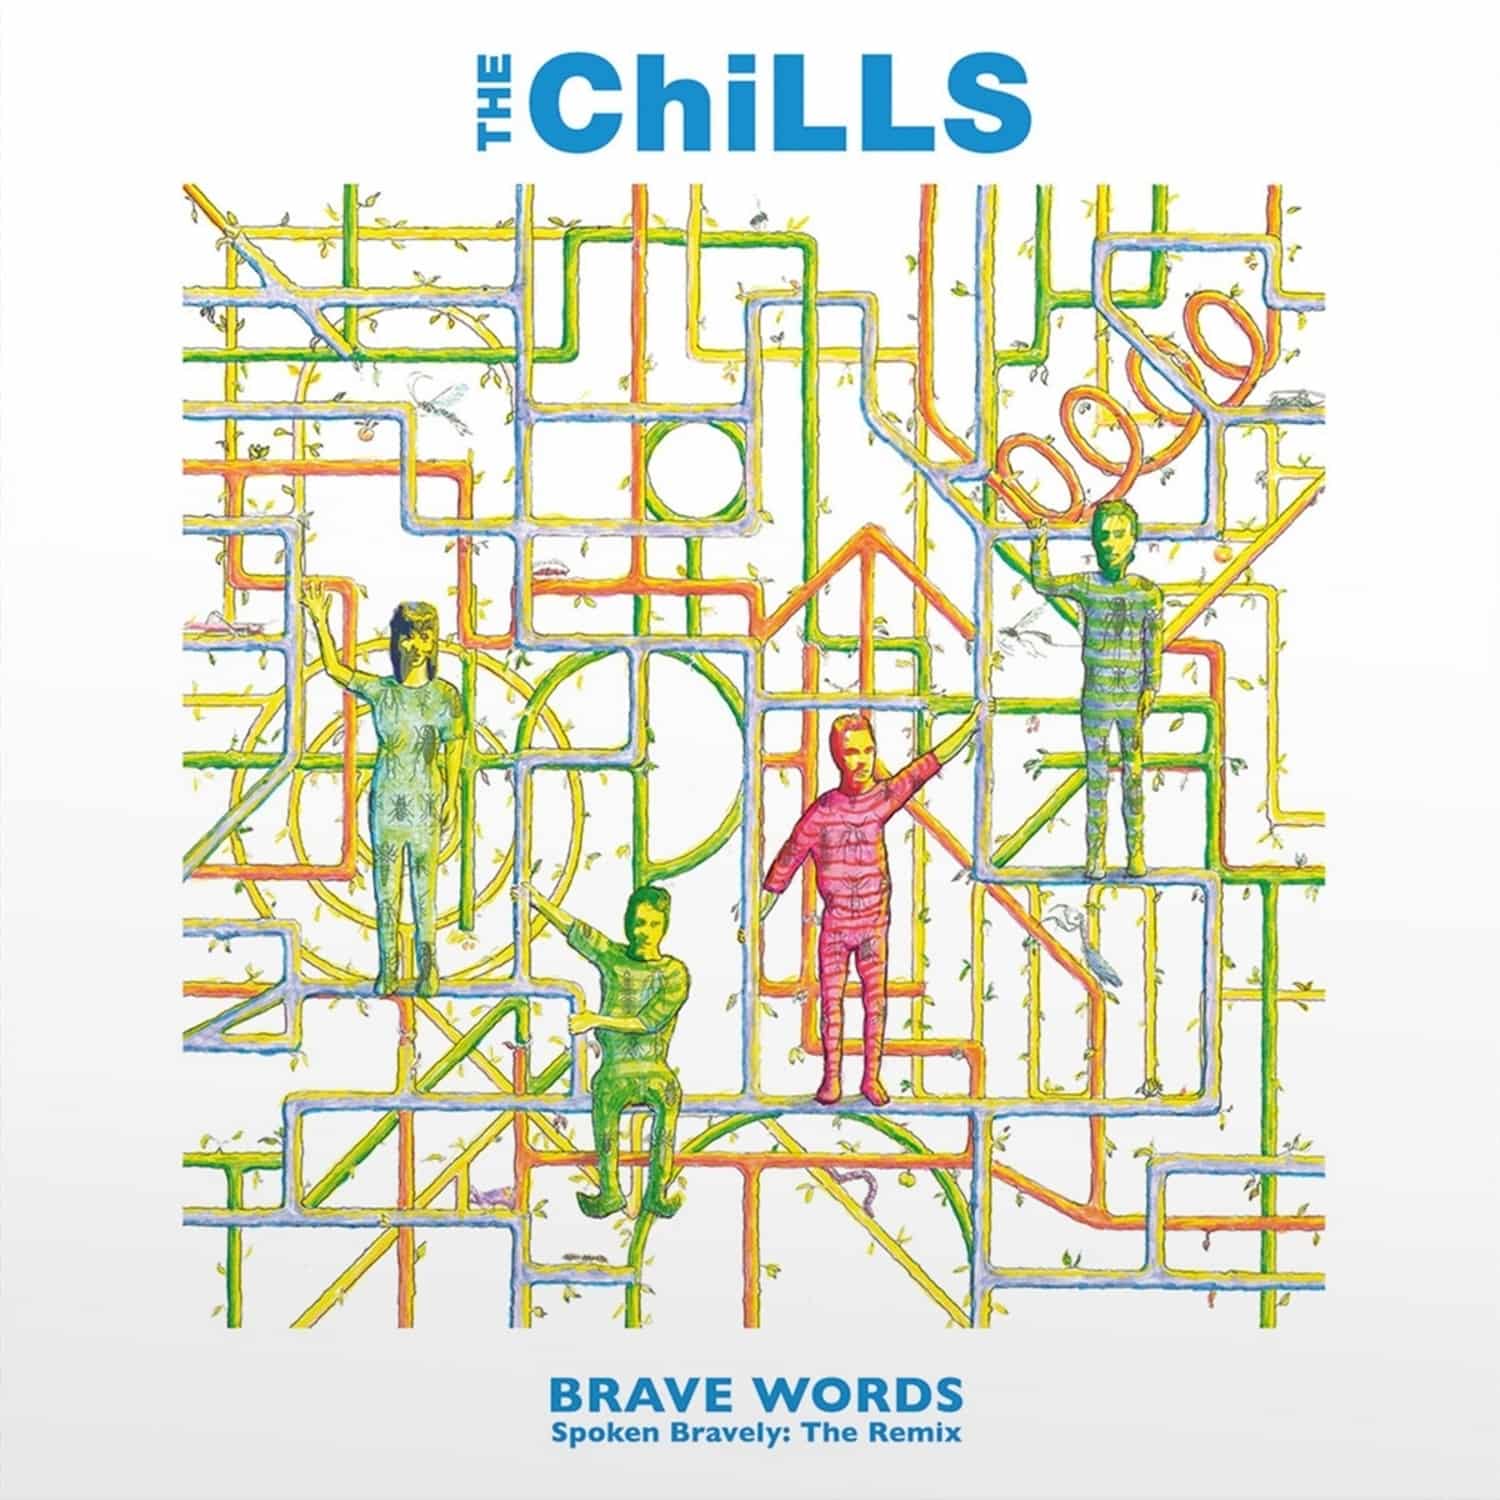 The Chills - BRAVE WORDS SPOKEN BRAVELY: THE REMIX 